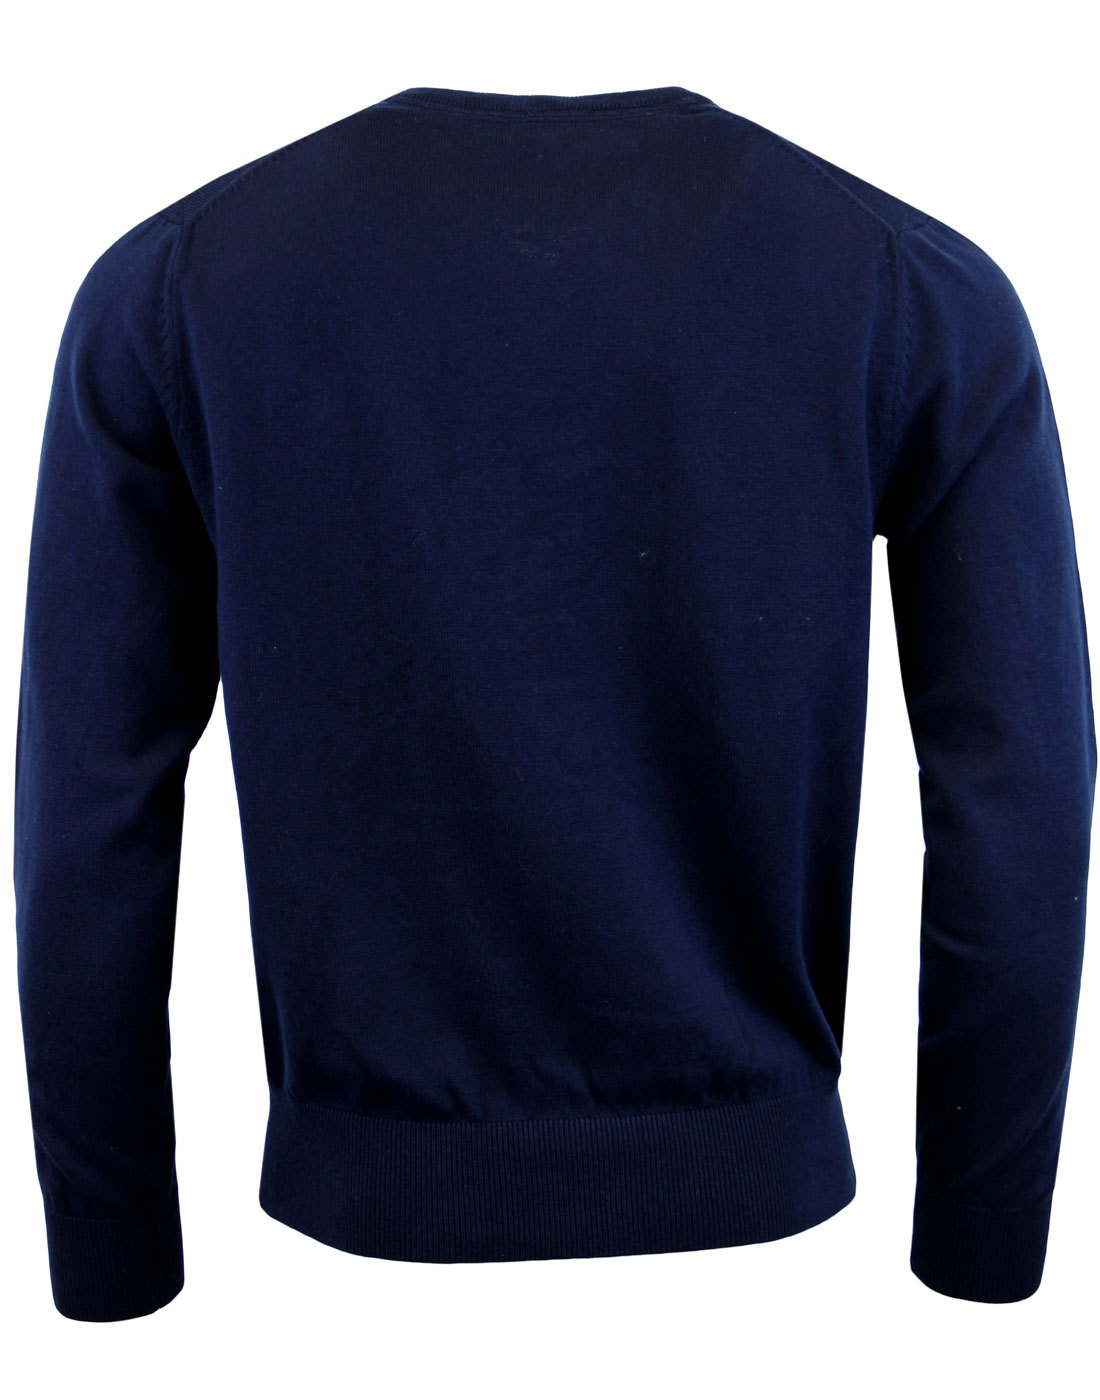 MERC Corby Retro Mod Sixites Knitted V-Neck Jumper in Navy